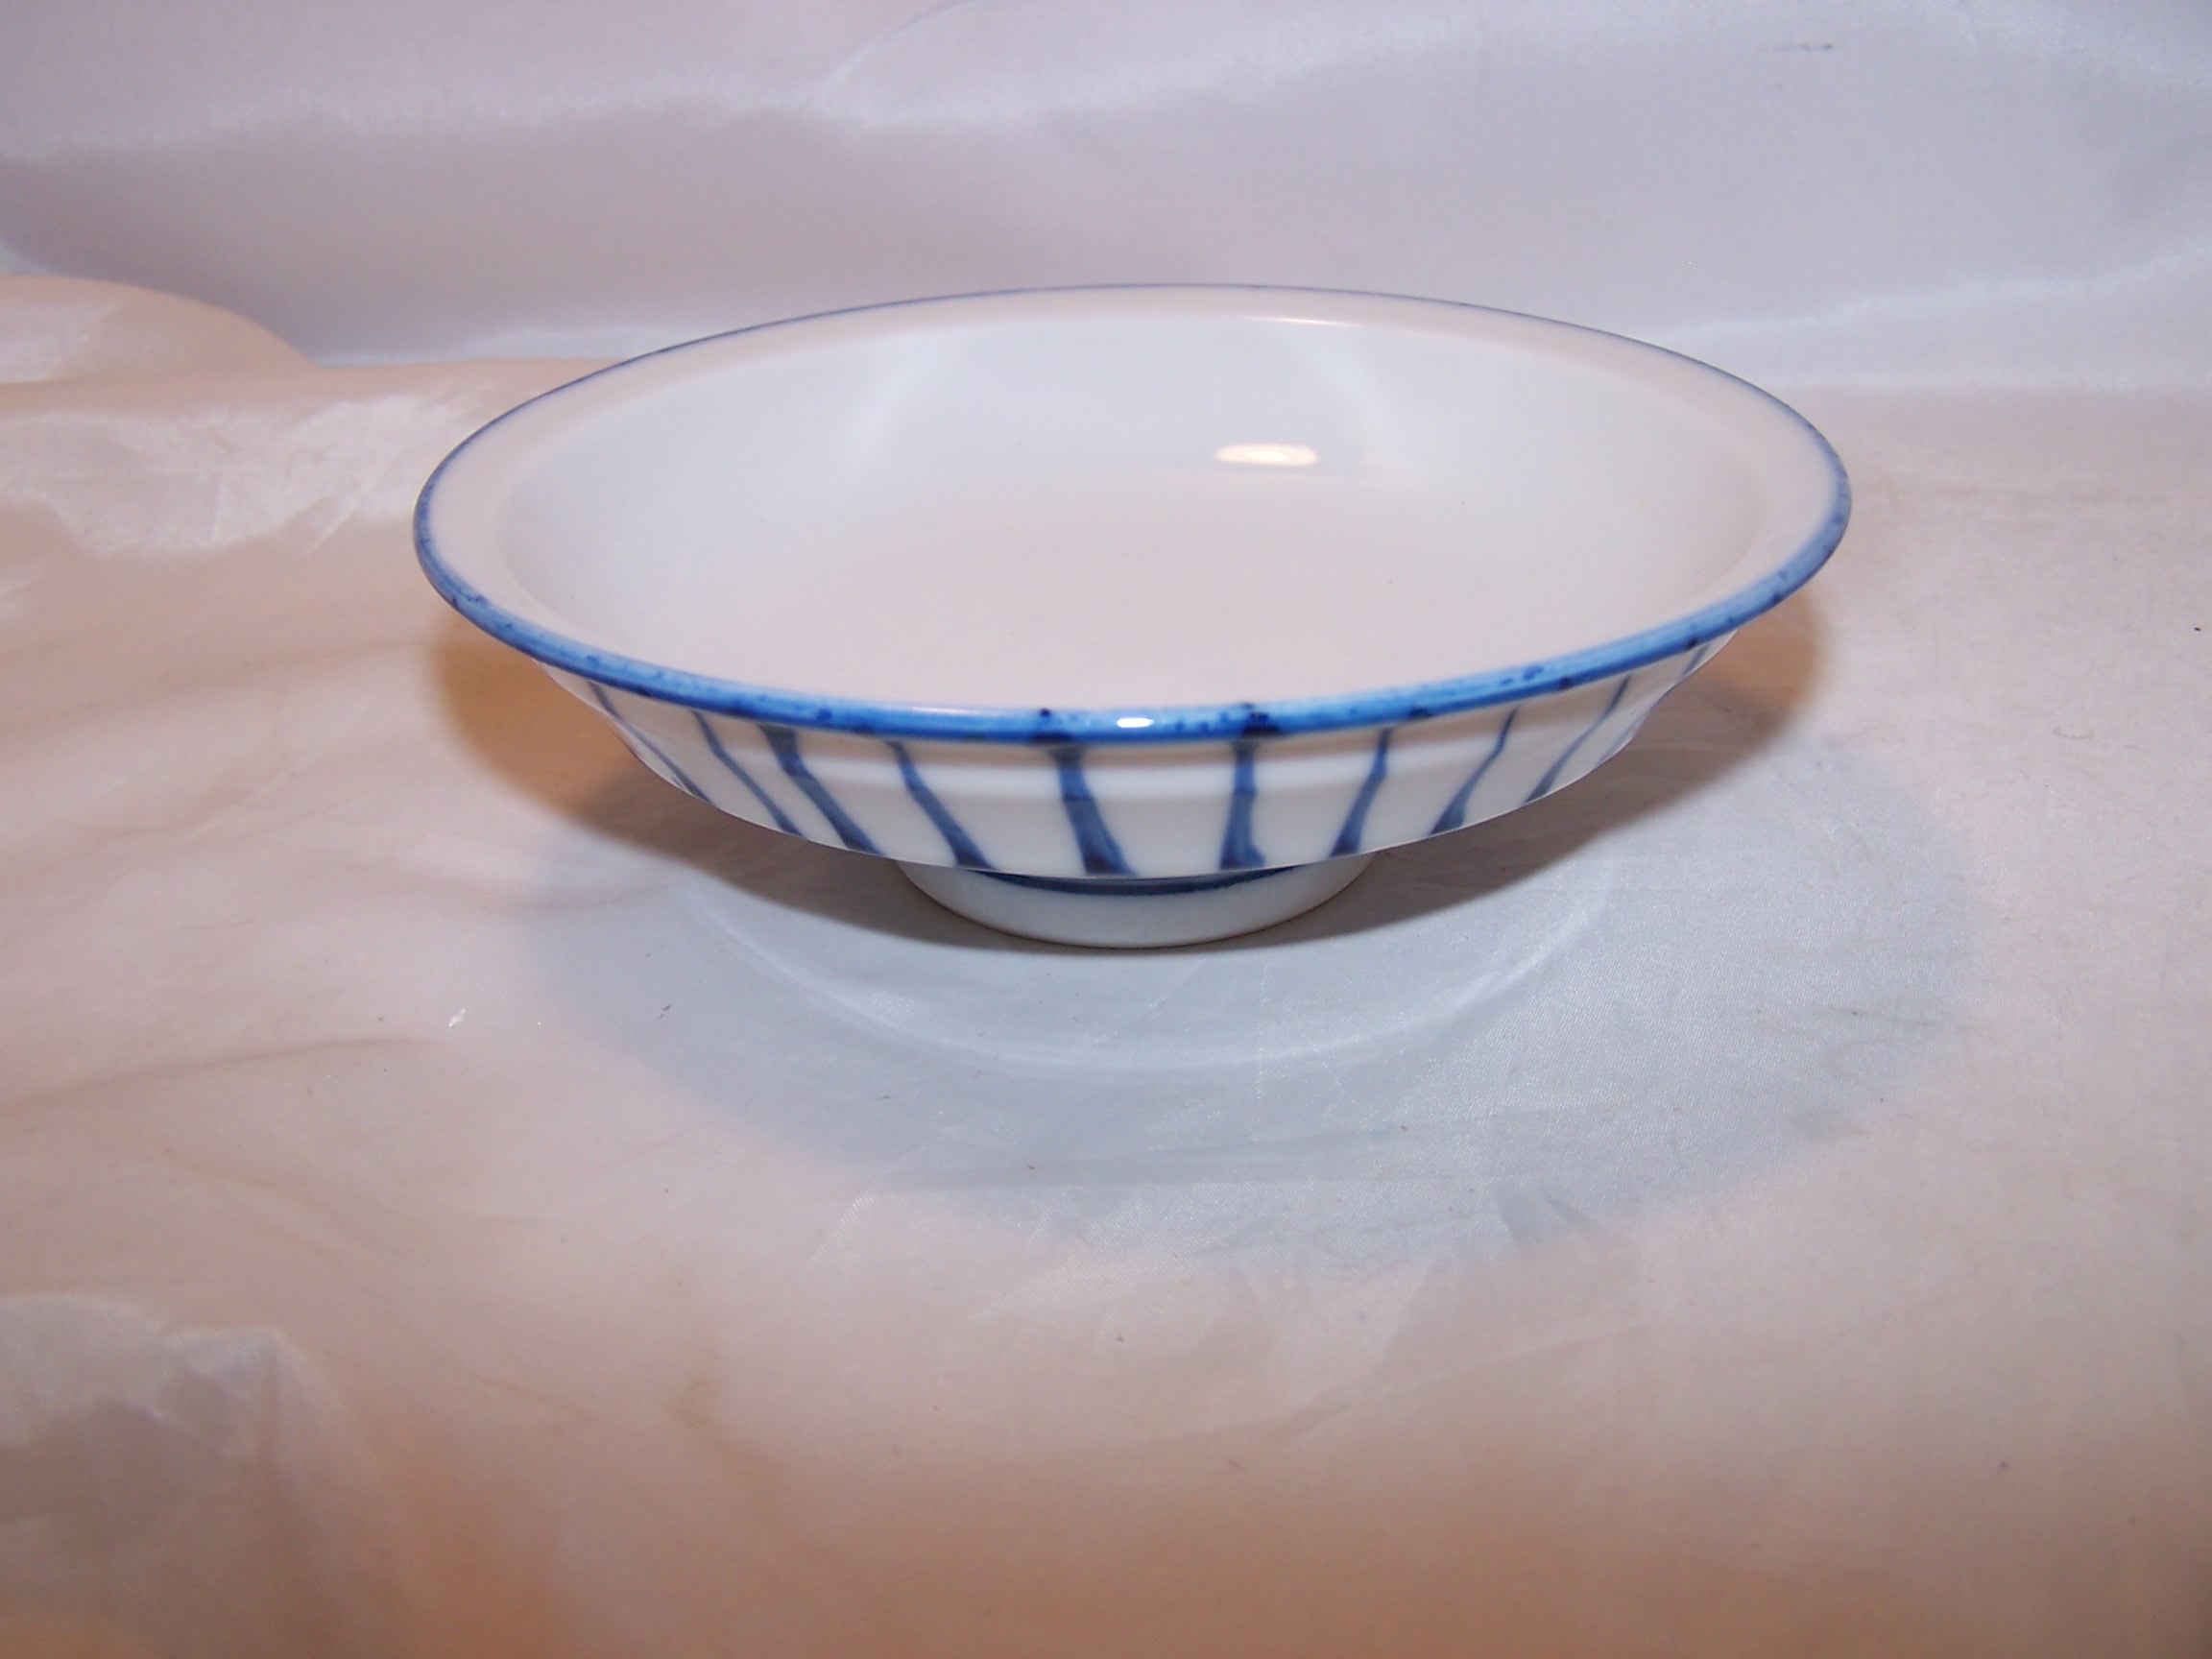 Image 2 of Rice Bowl Lid, Blue White Shallow Bowl, Chinese